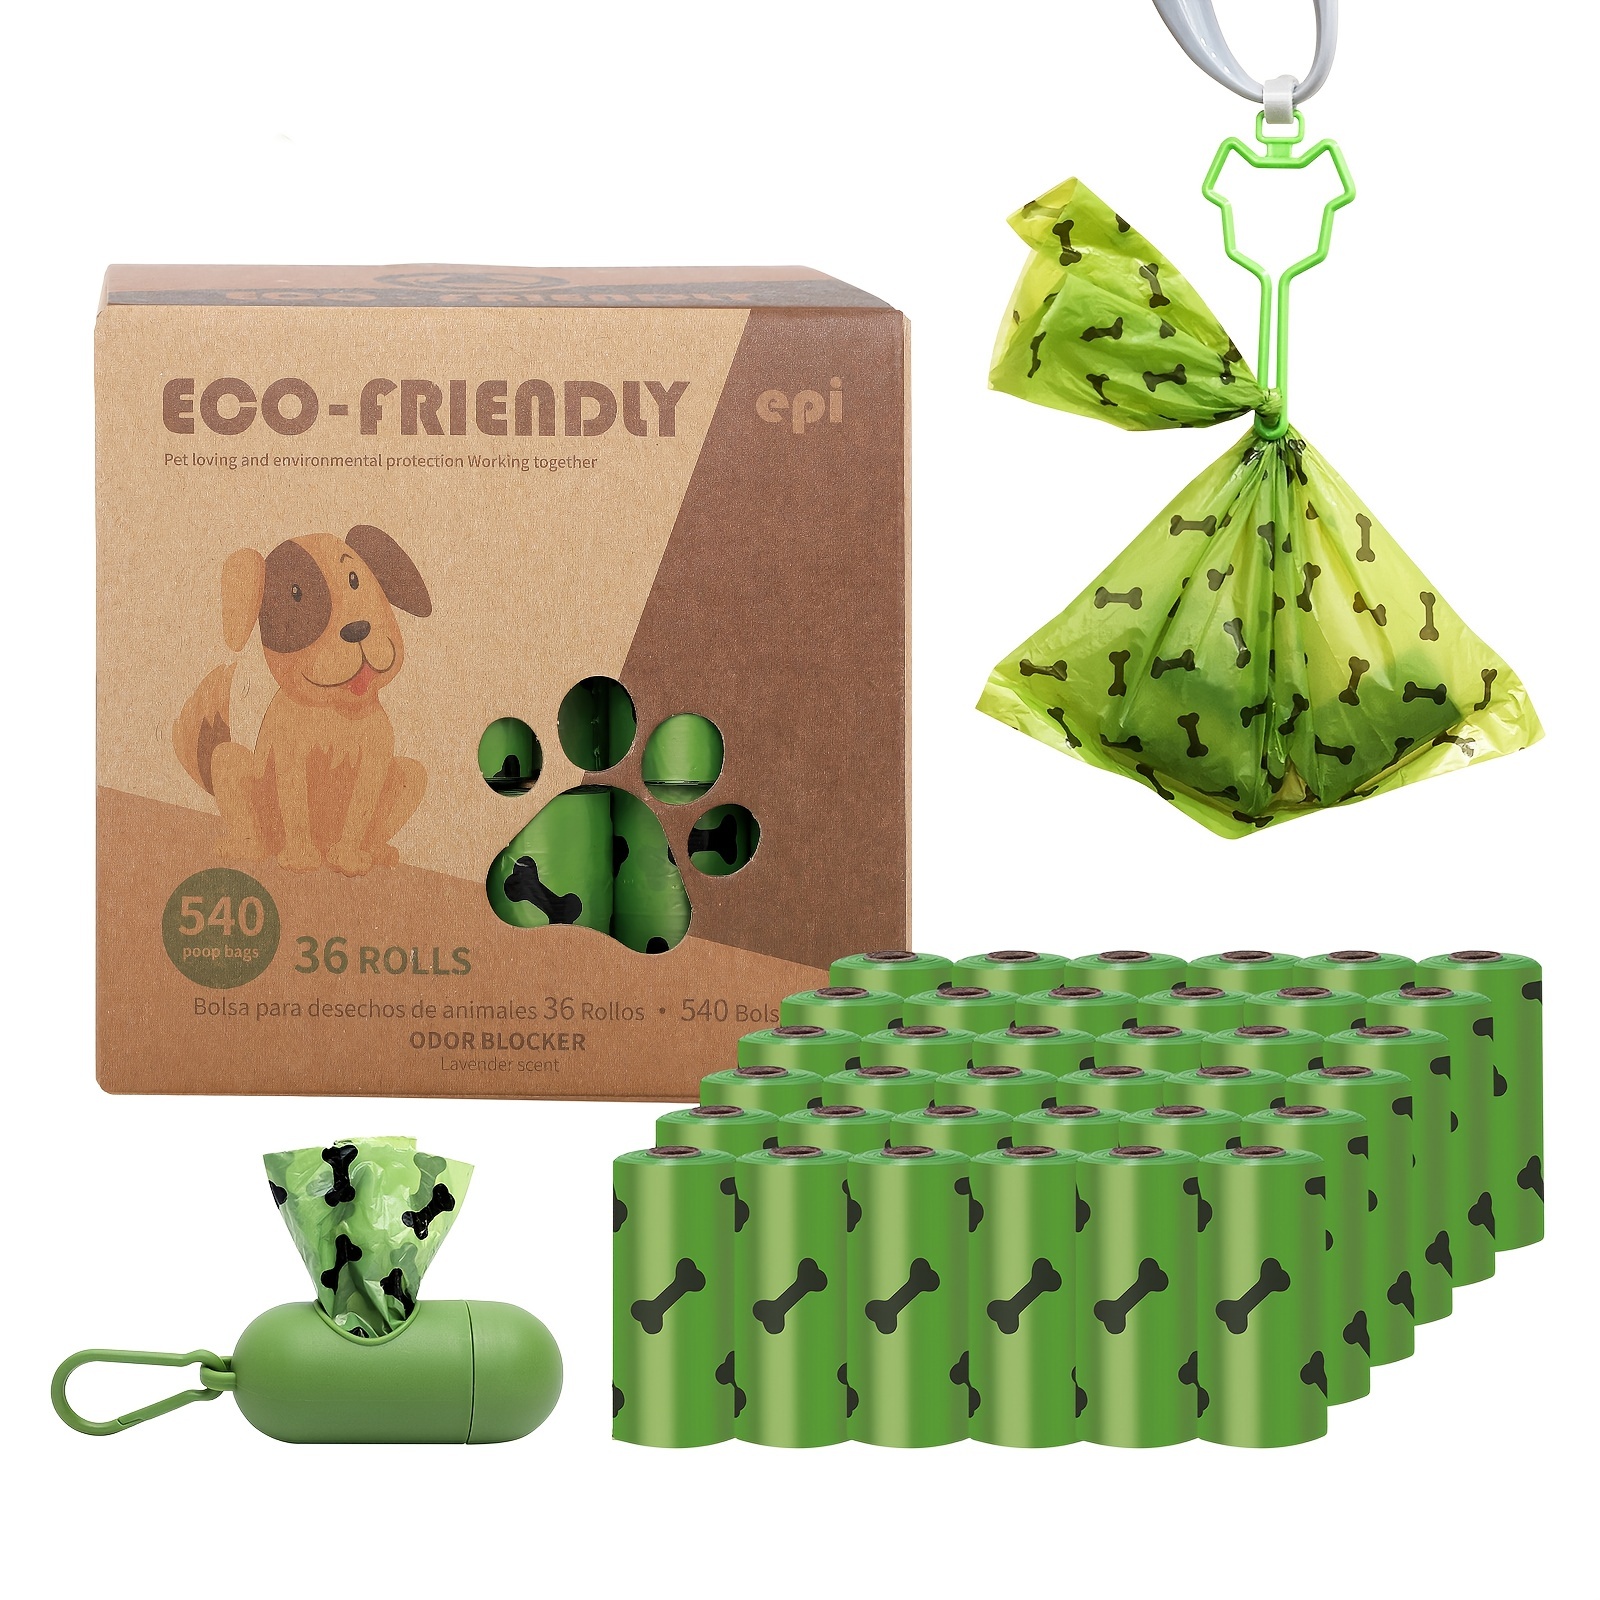 120pcs Dog Poop Bags | Degradable Garbage Bags for Dog Waste